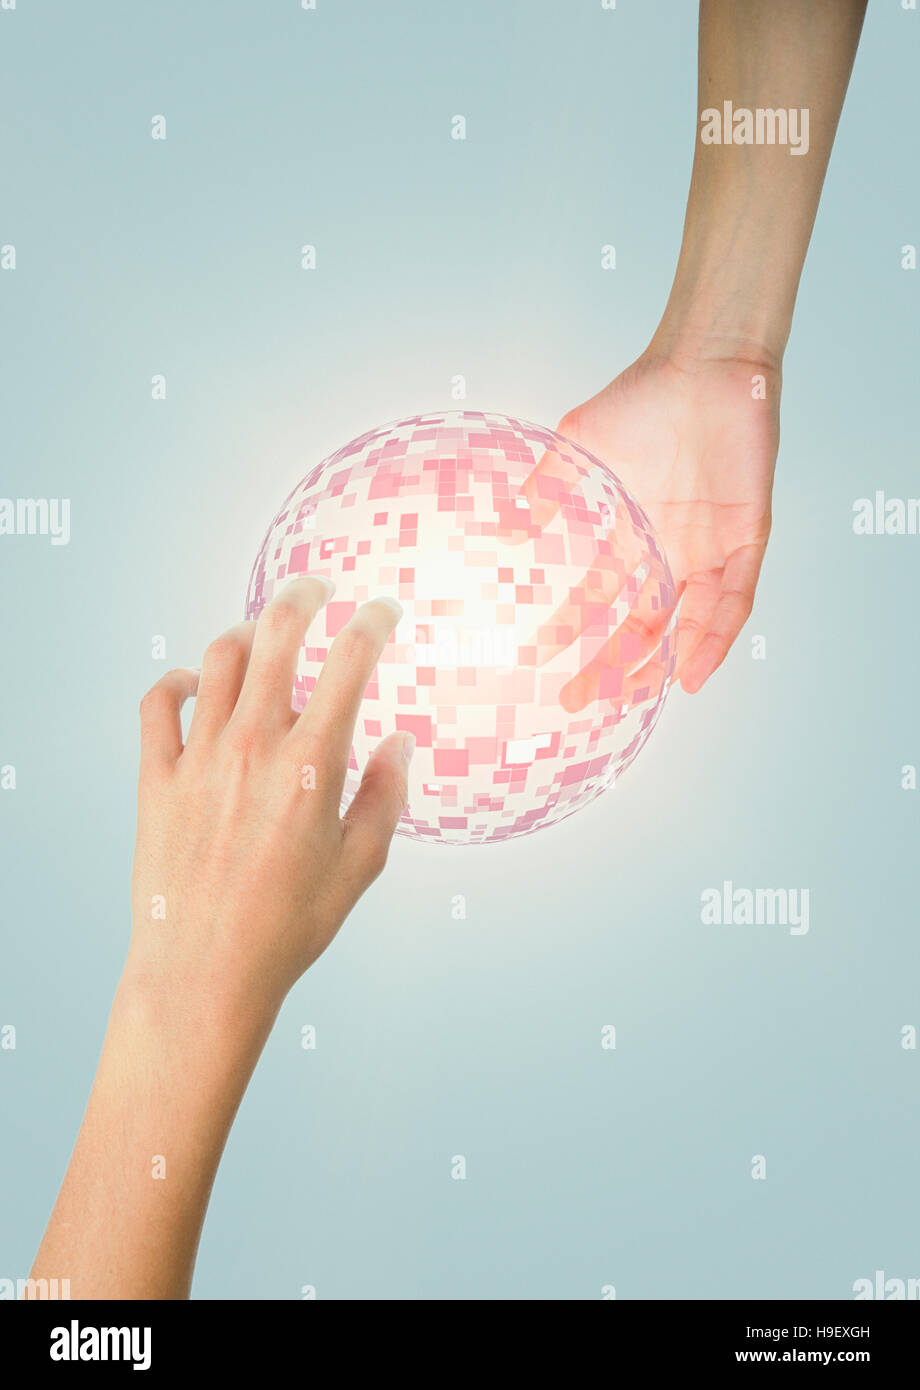 Hands of Mixed Race boy holding glowing pixel sphere Stock Photo